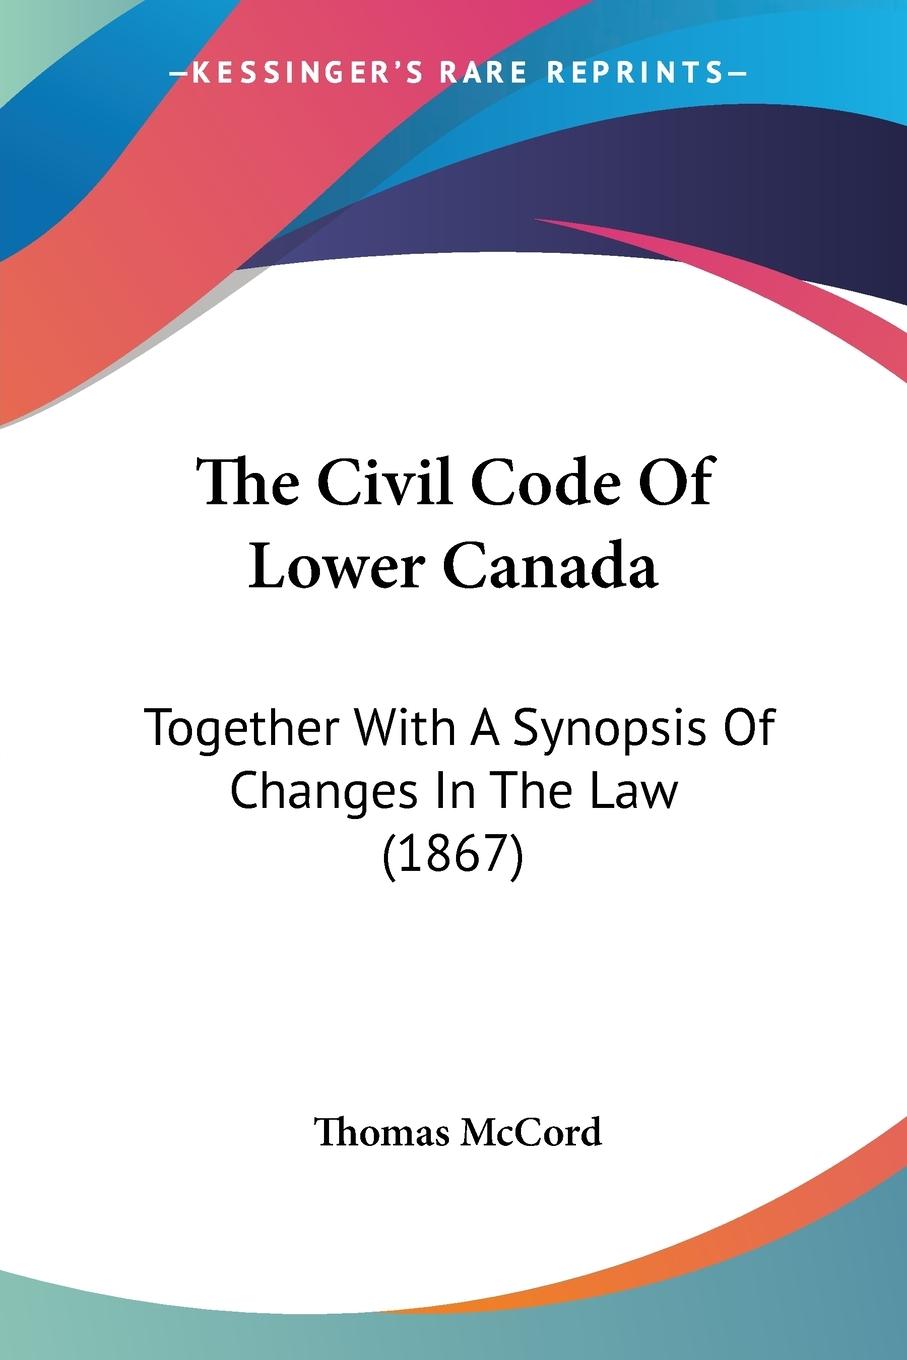 The Civil Code Of Lower Canada - McCord, Thomas